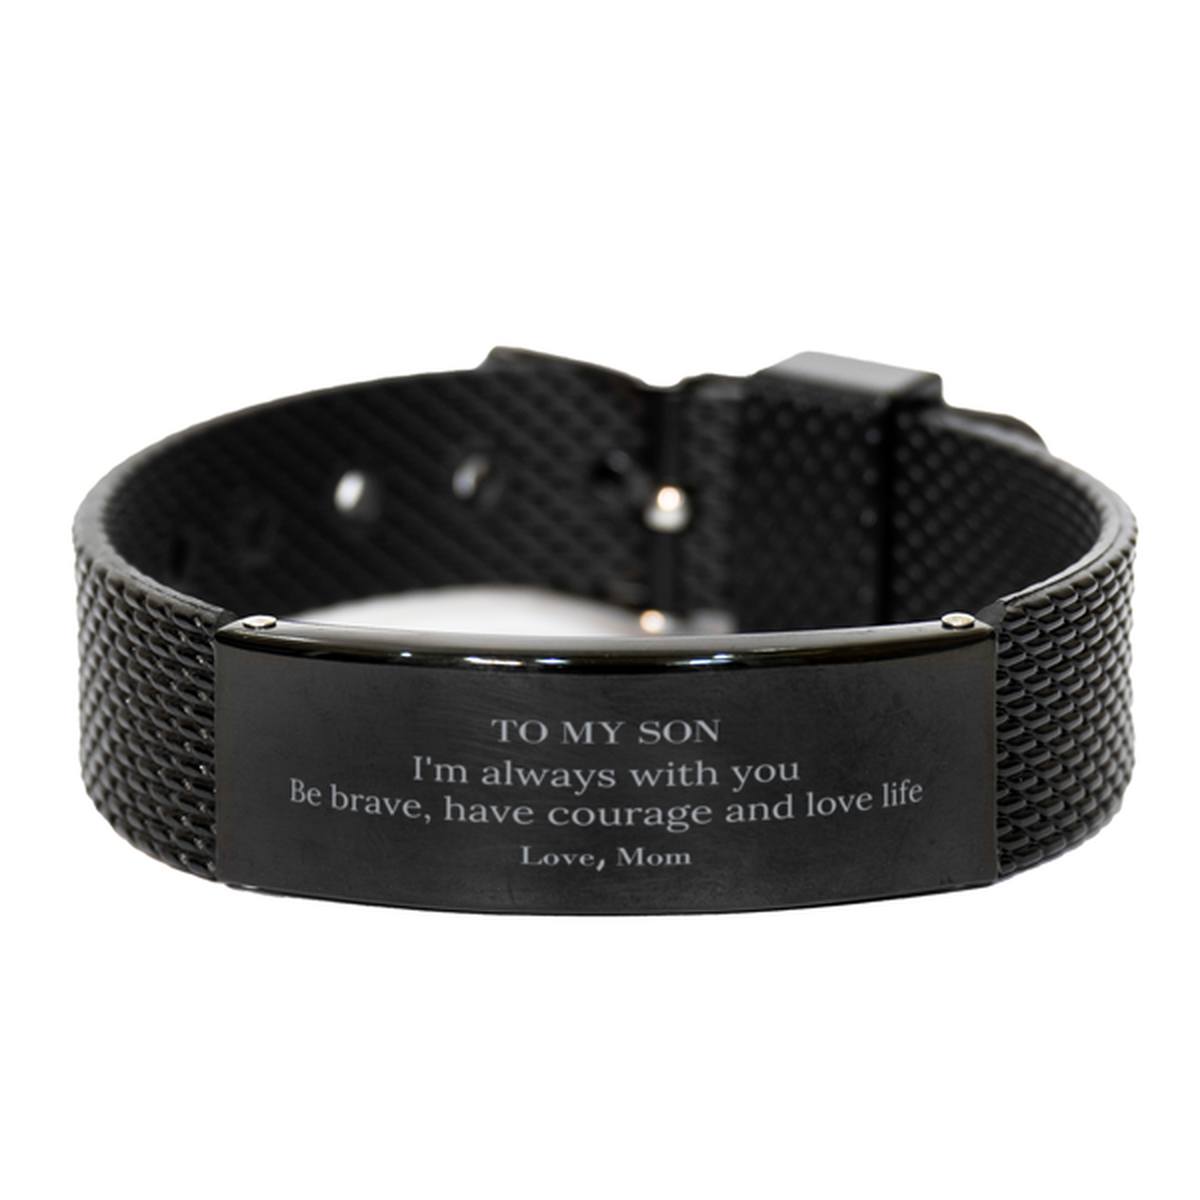 To My Son Gifts from Mom, Unique Black Shark Mesh Bracelet Inspirational Christmas Birthday Graduation Gifts for Son I'm always with you. Be brave, have courage and love life. Love, Mom